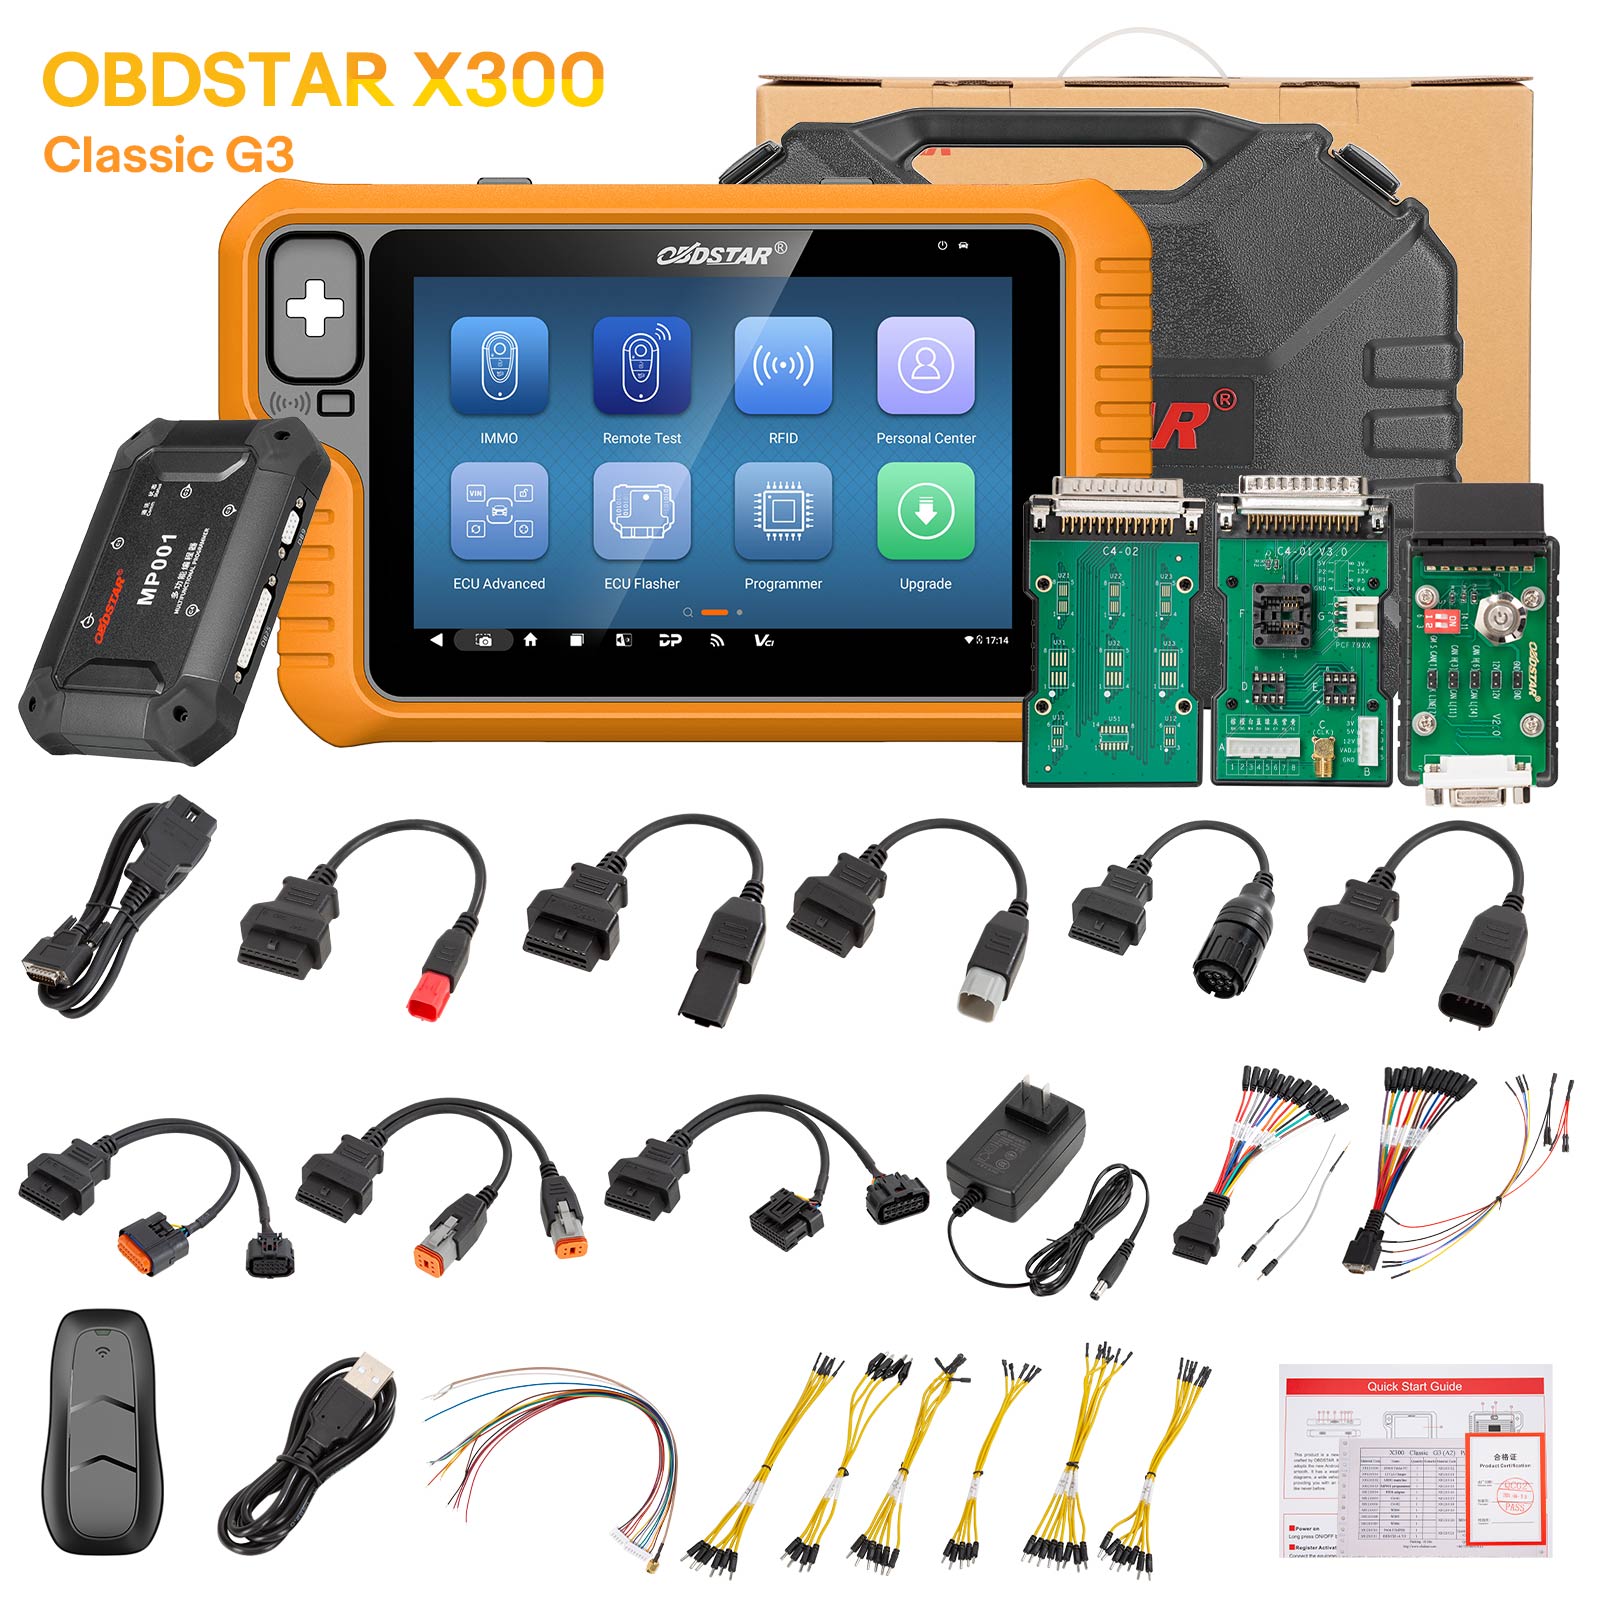 OBDSTAR X300 Classic G3 package